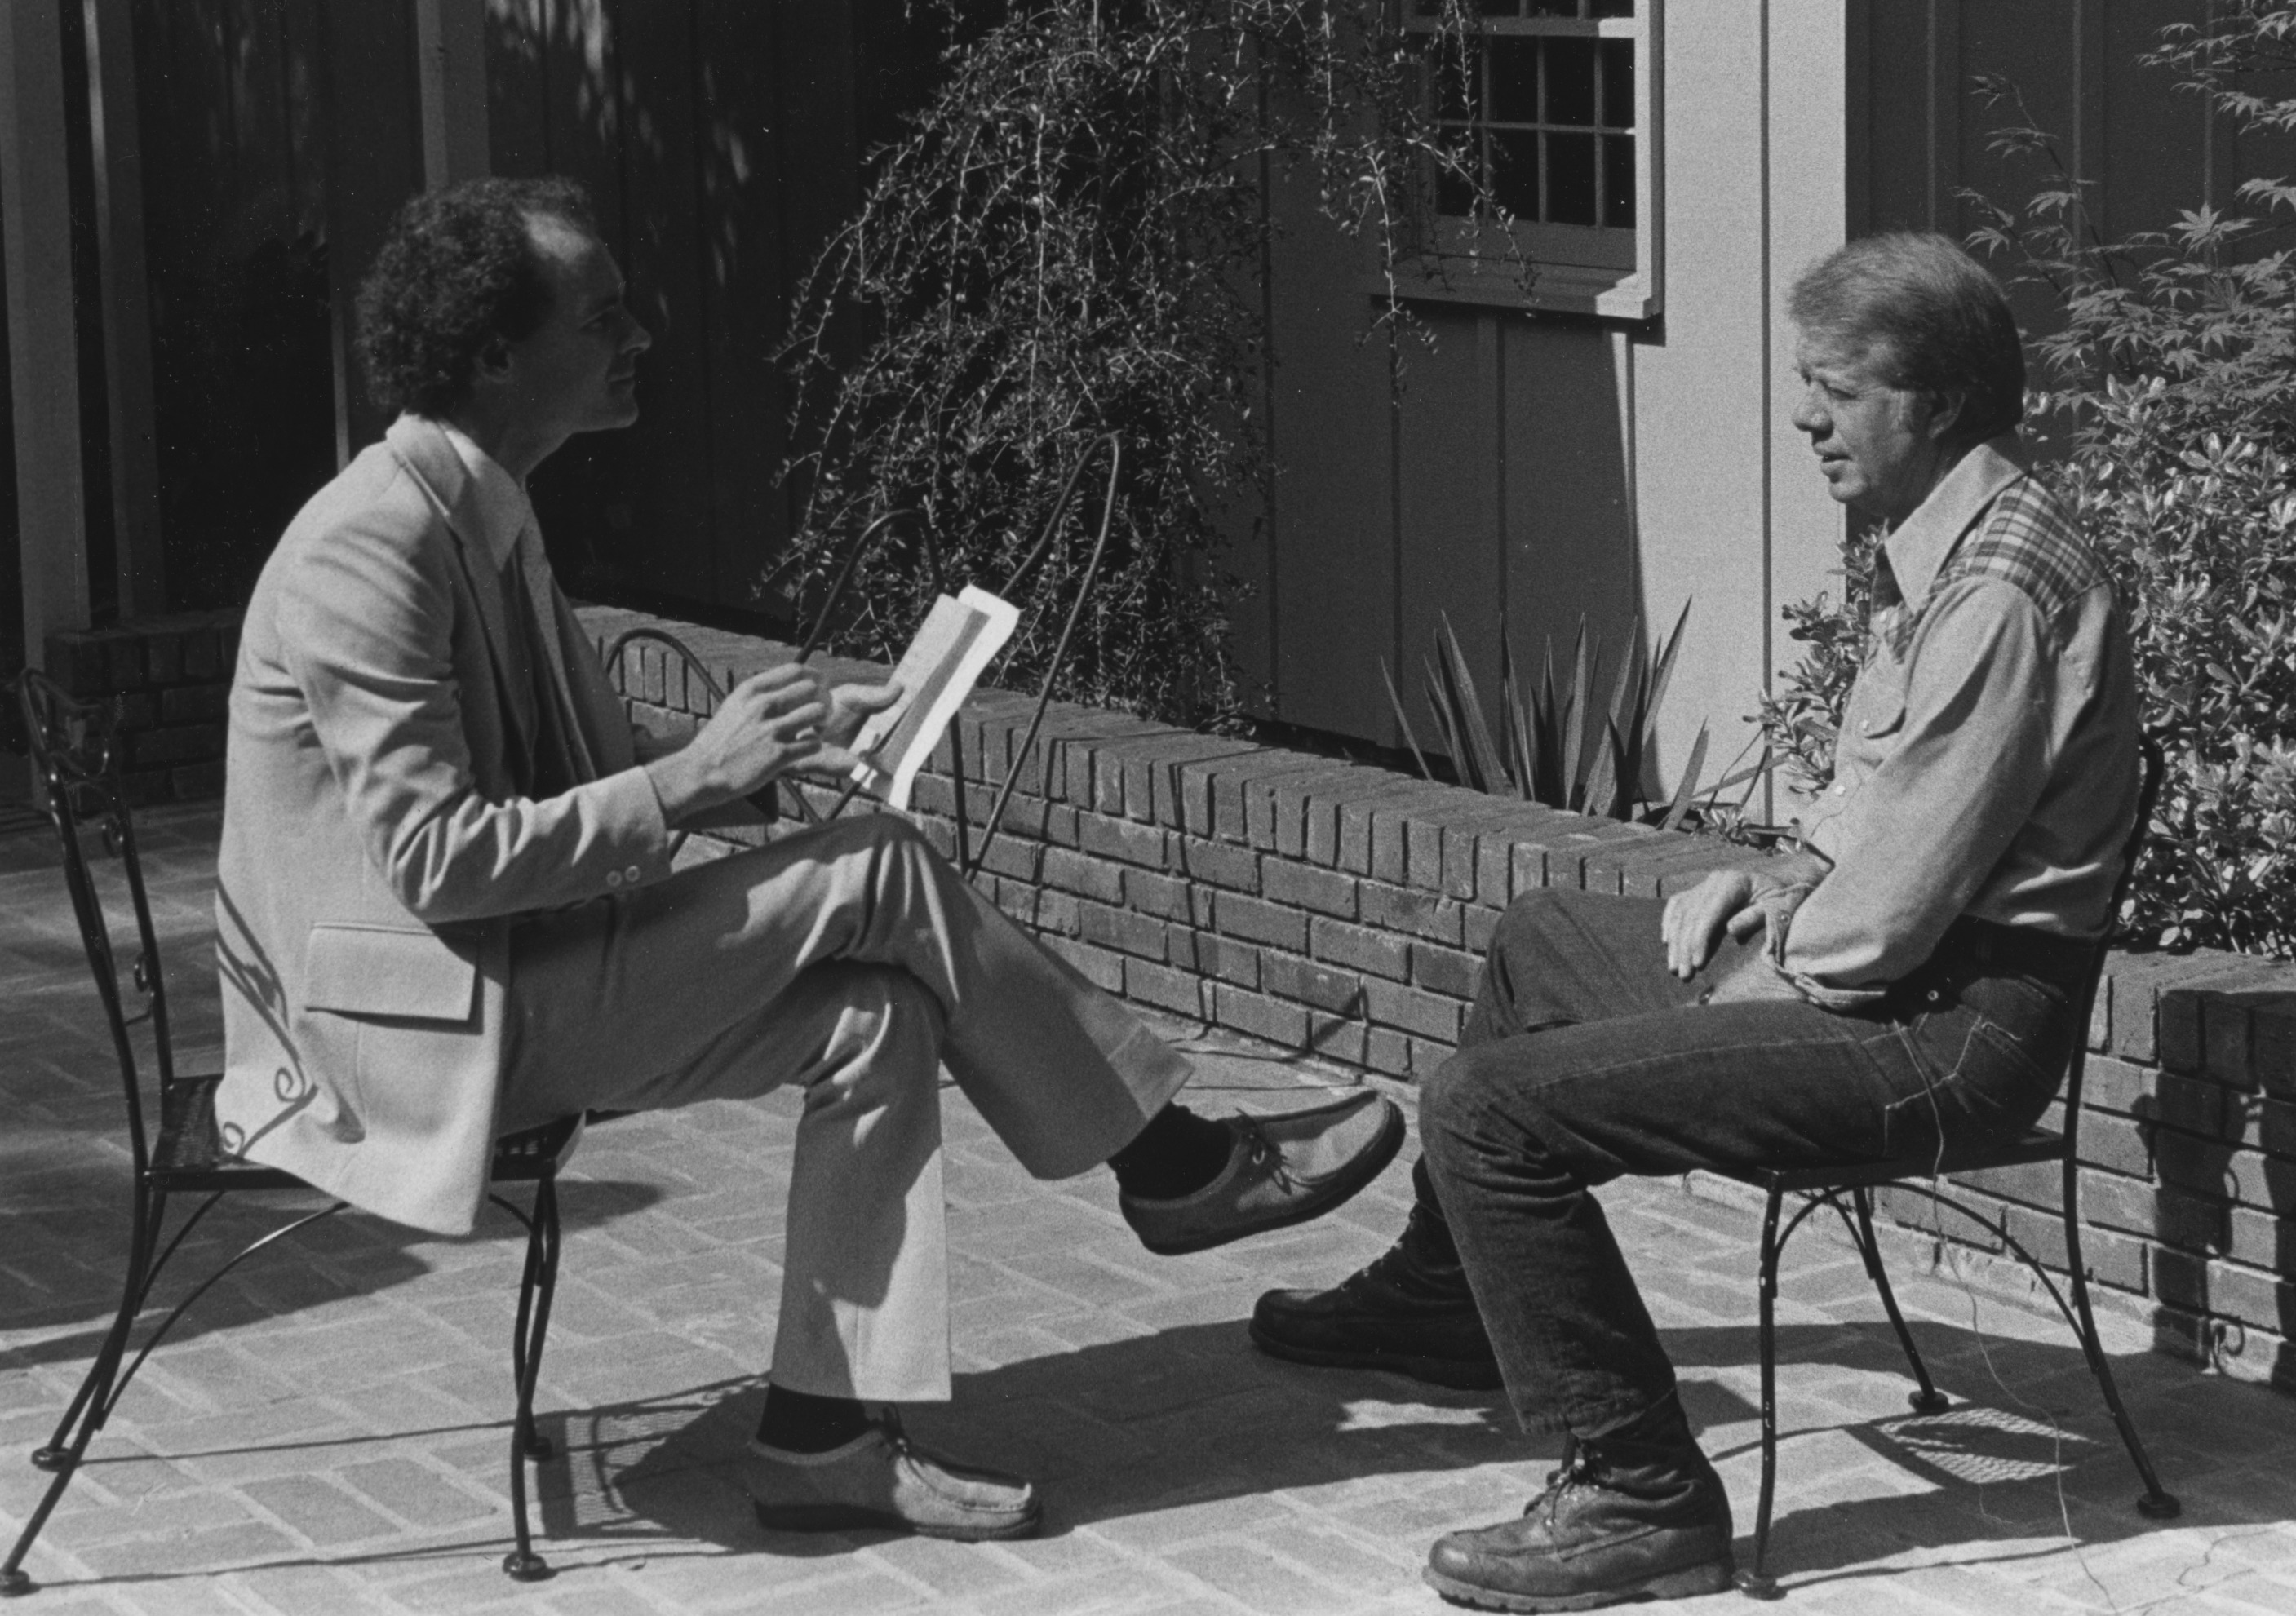 Director Ross Spears interviewing Jimmy Carter in 1976 for the film AGEE. On Carter's back porch in Plains, GA.